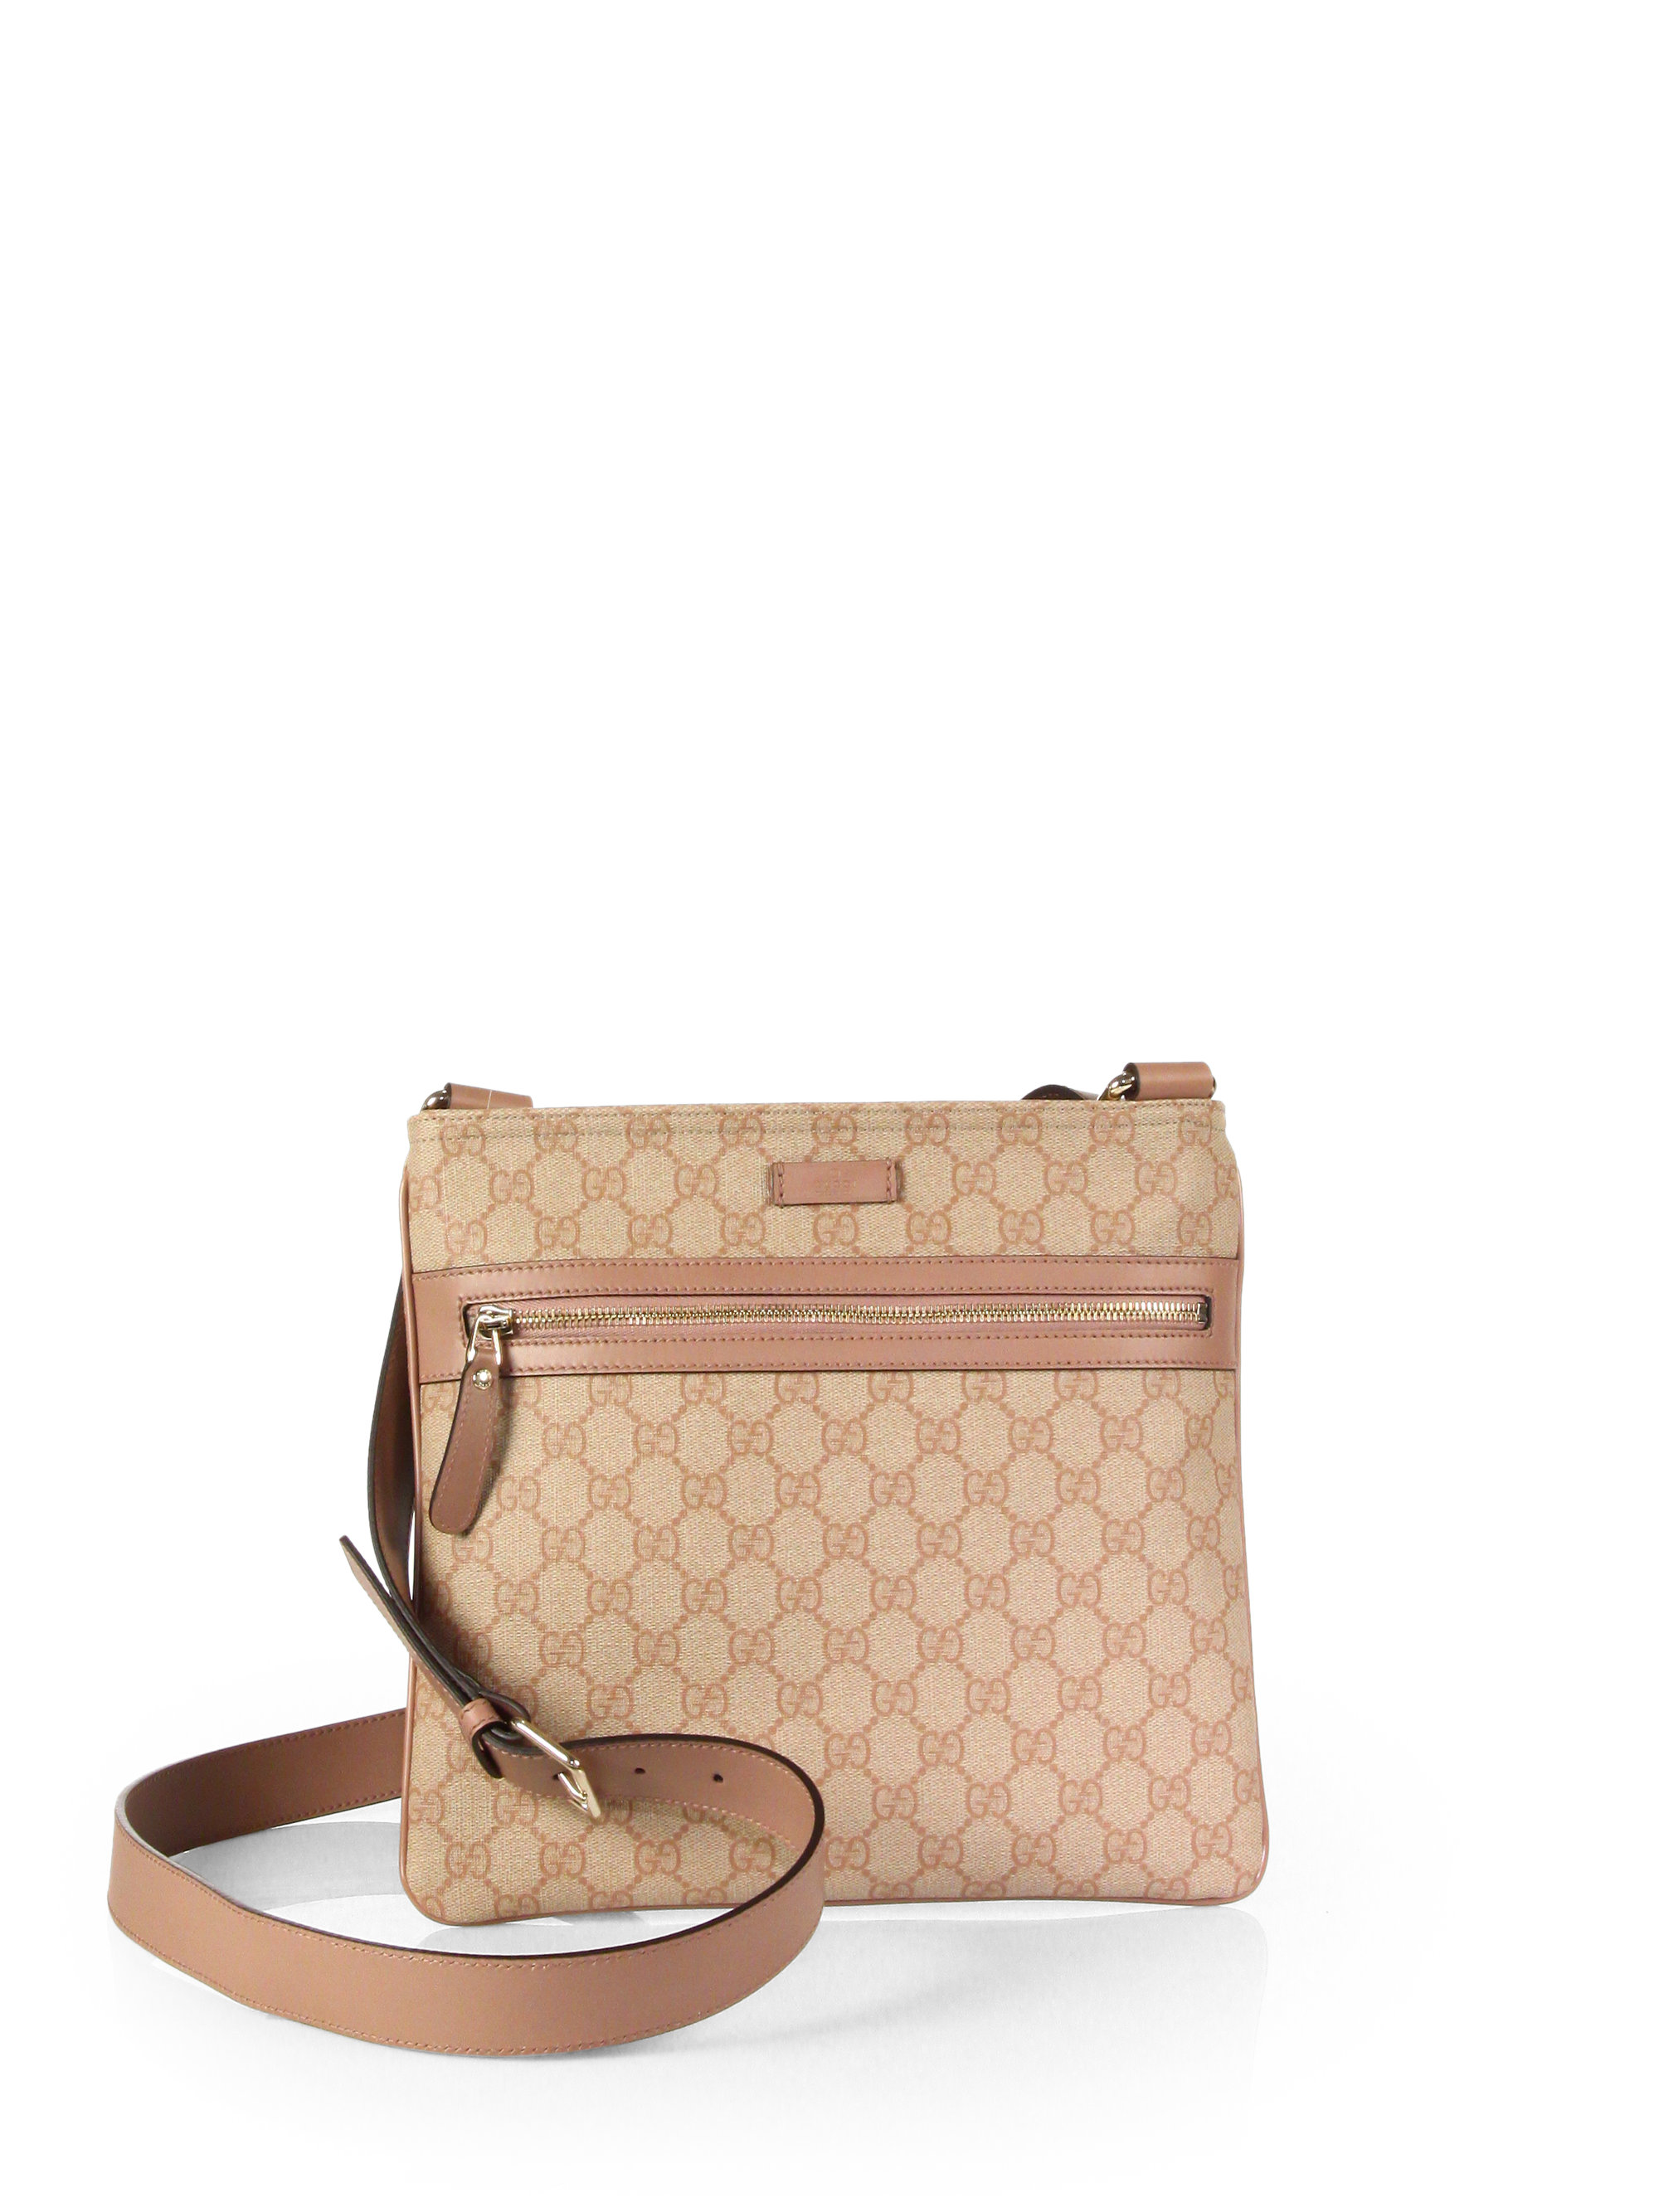 Lyst - Gucci Gg Supreme Canvas Flat Messenger in Pink